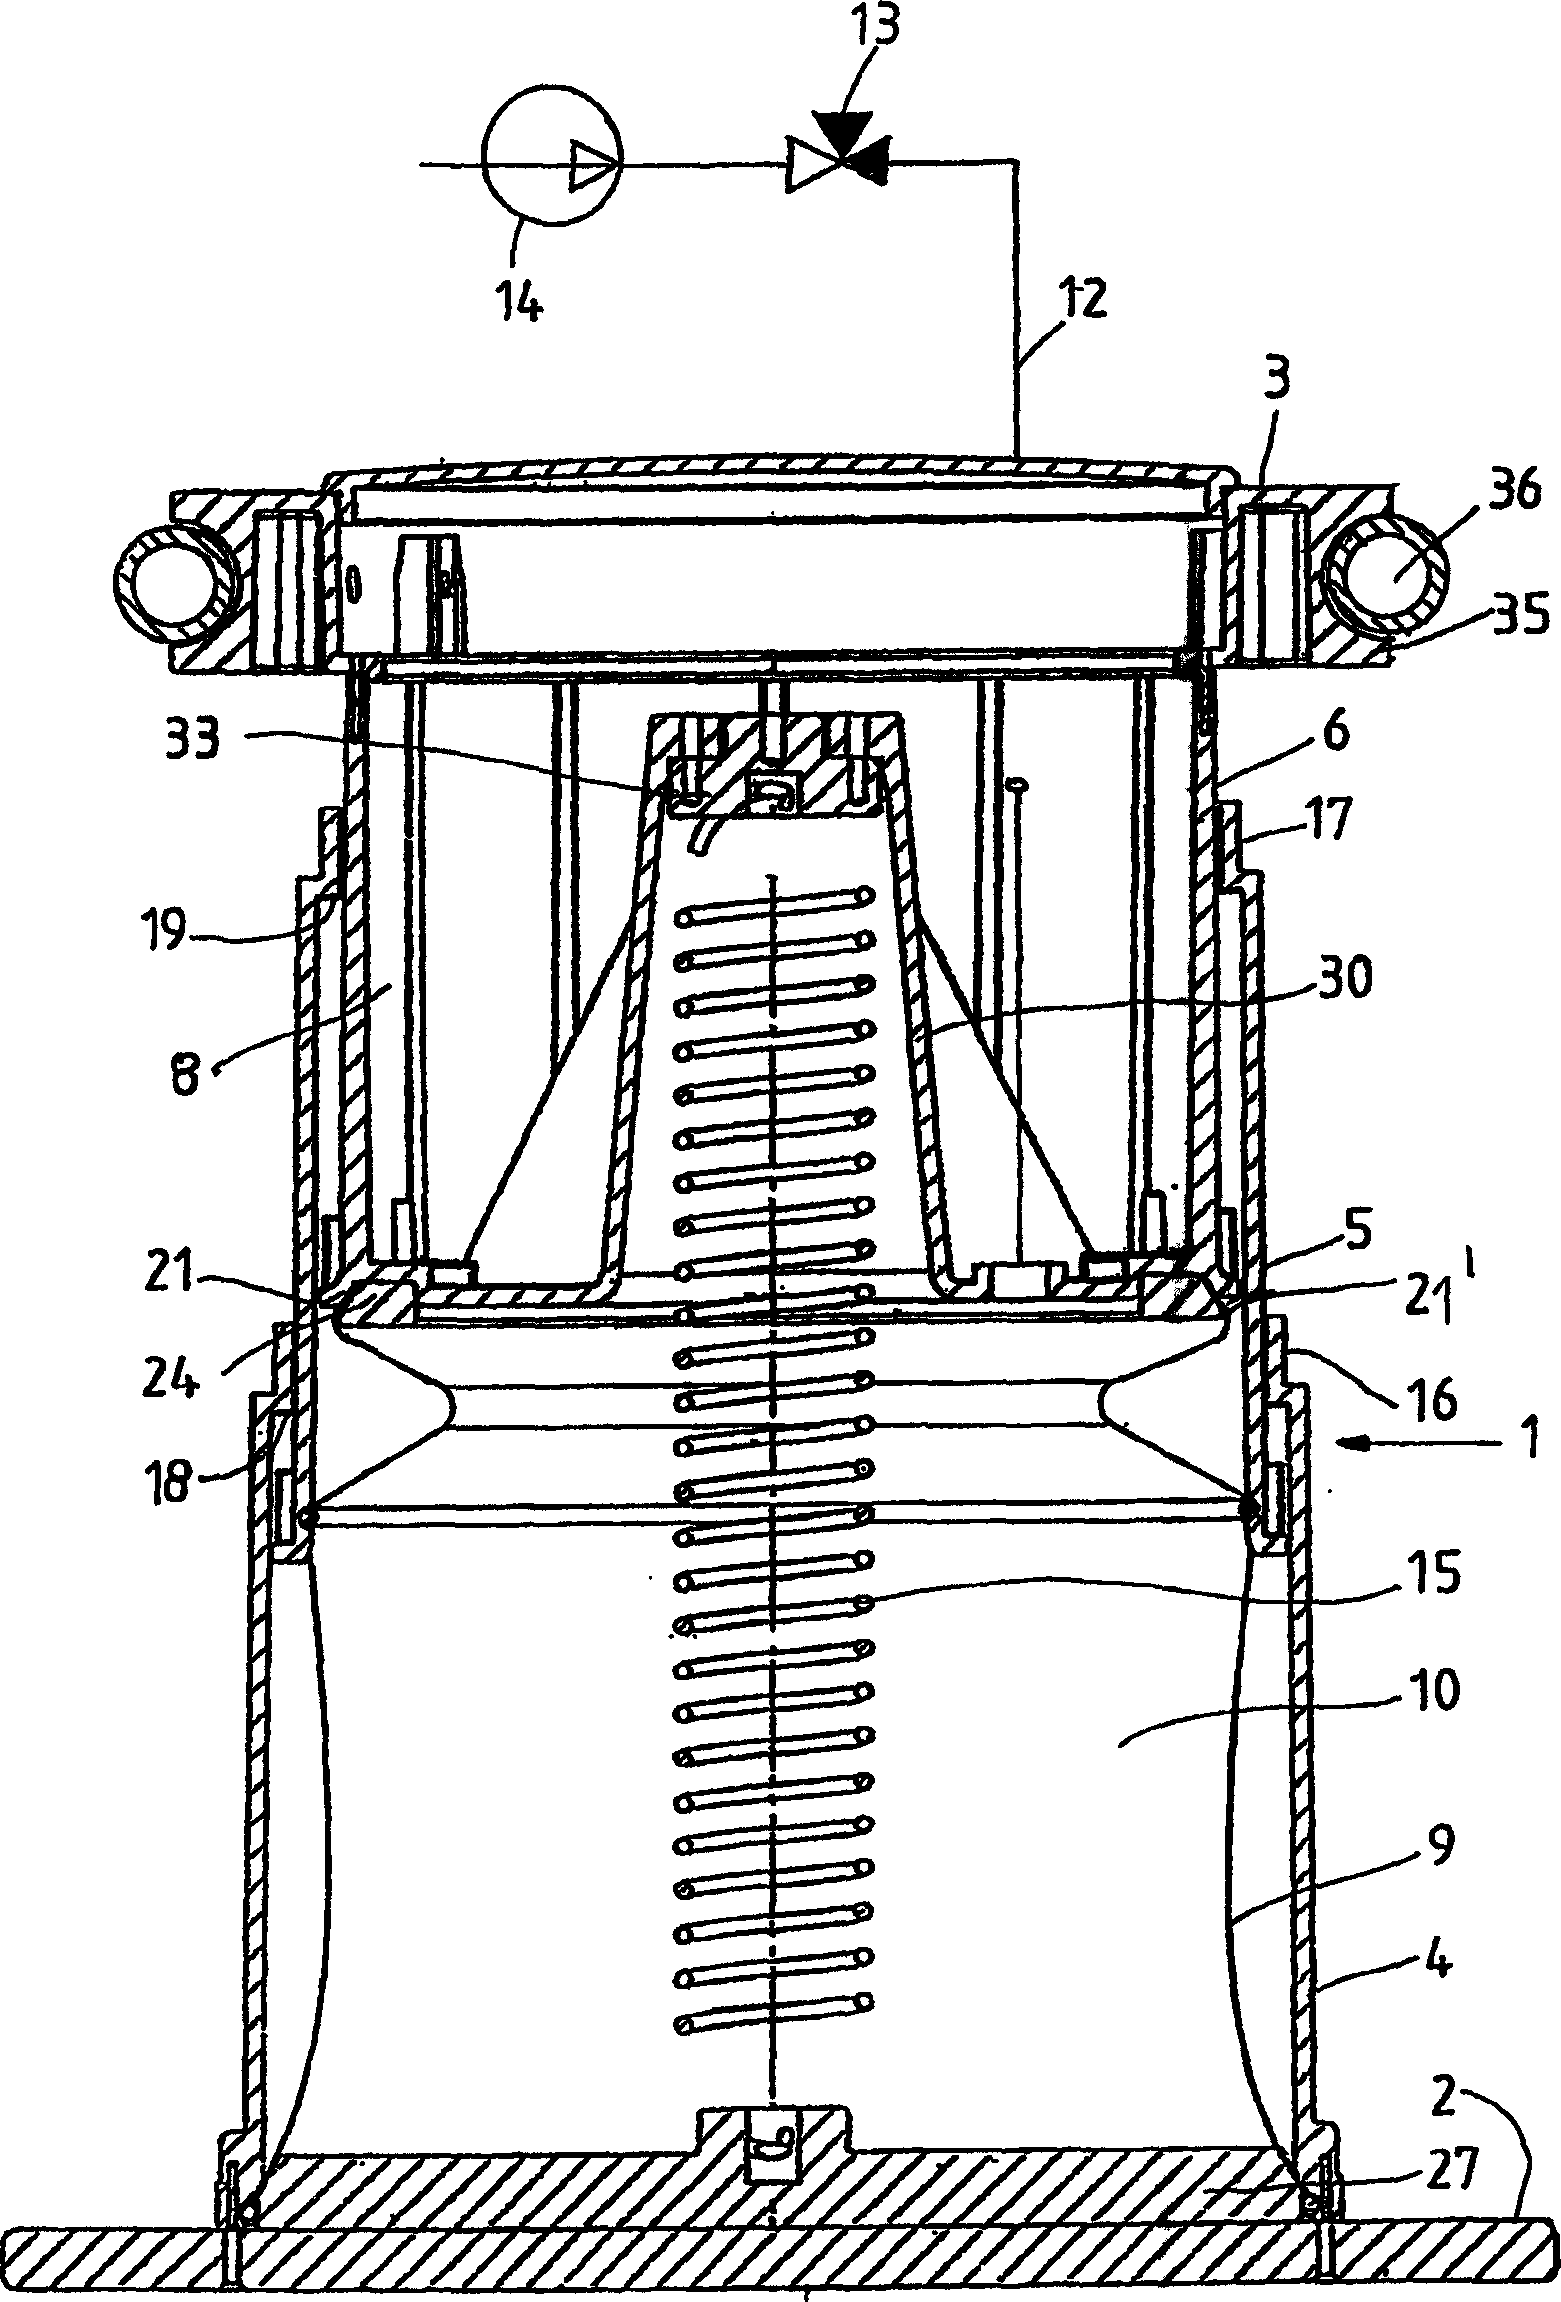 Pressing cylinder, preferably for use in a refuse compressor